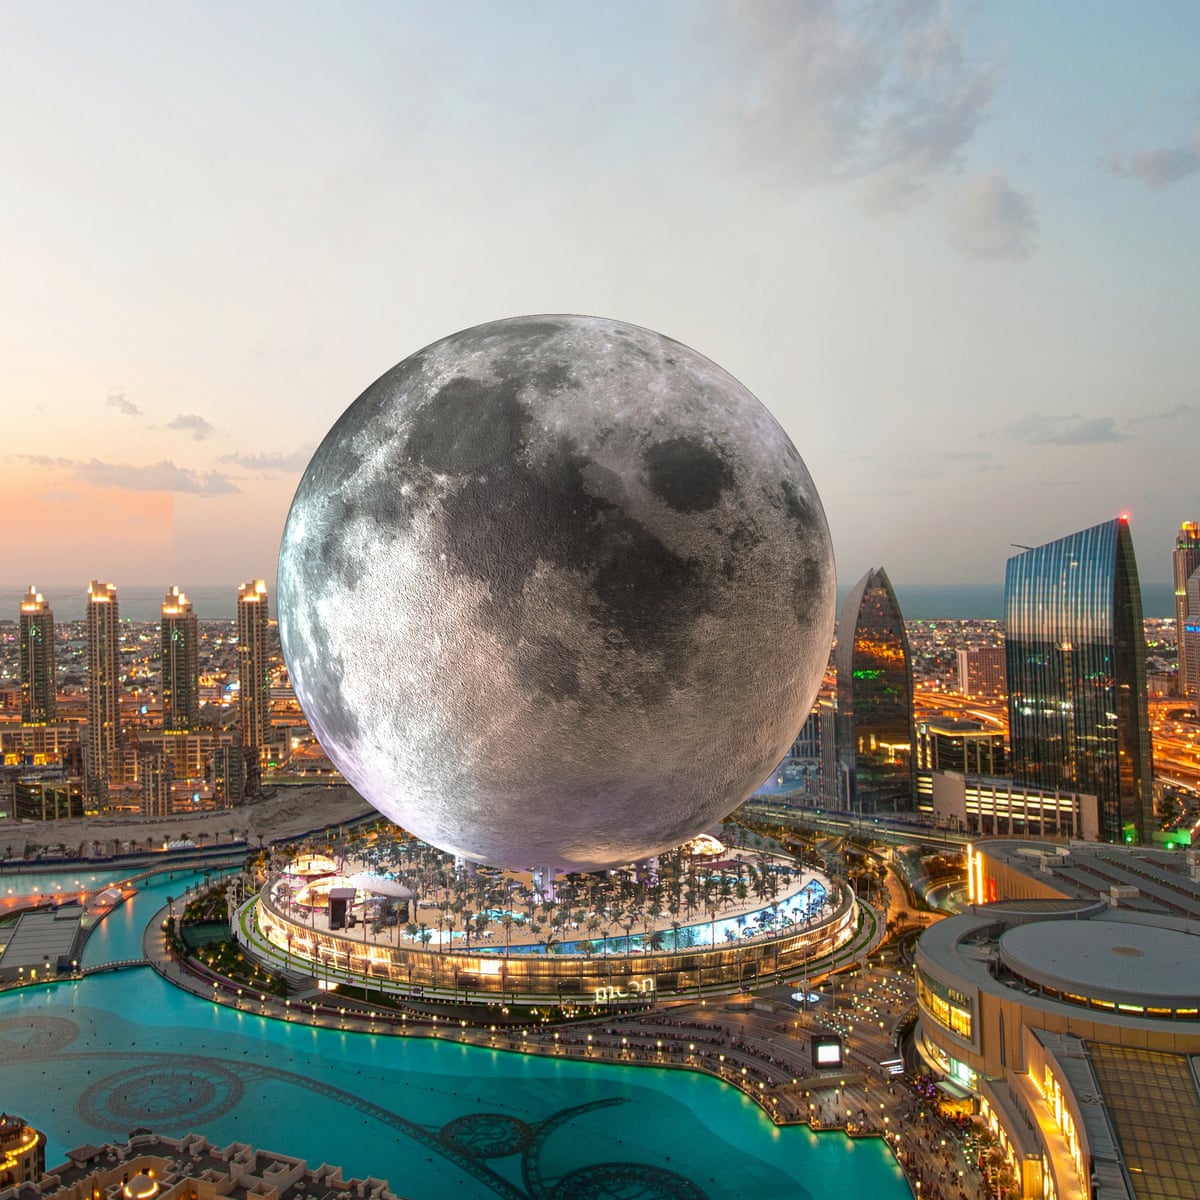 Want to visit the moon but don't have a spaceship? Dubai to the ...